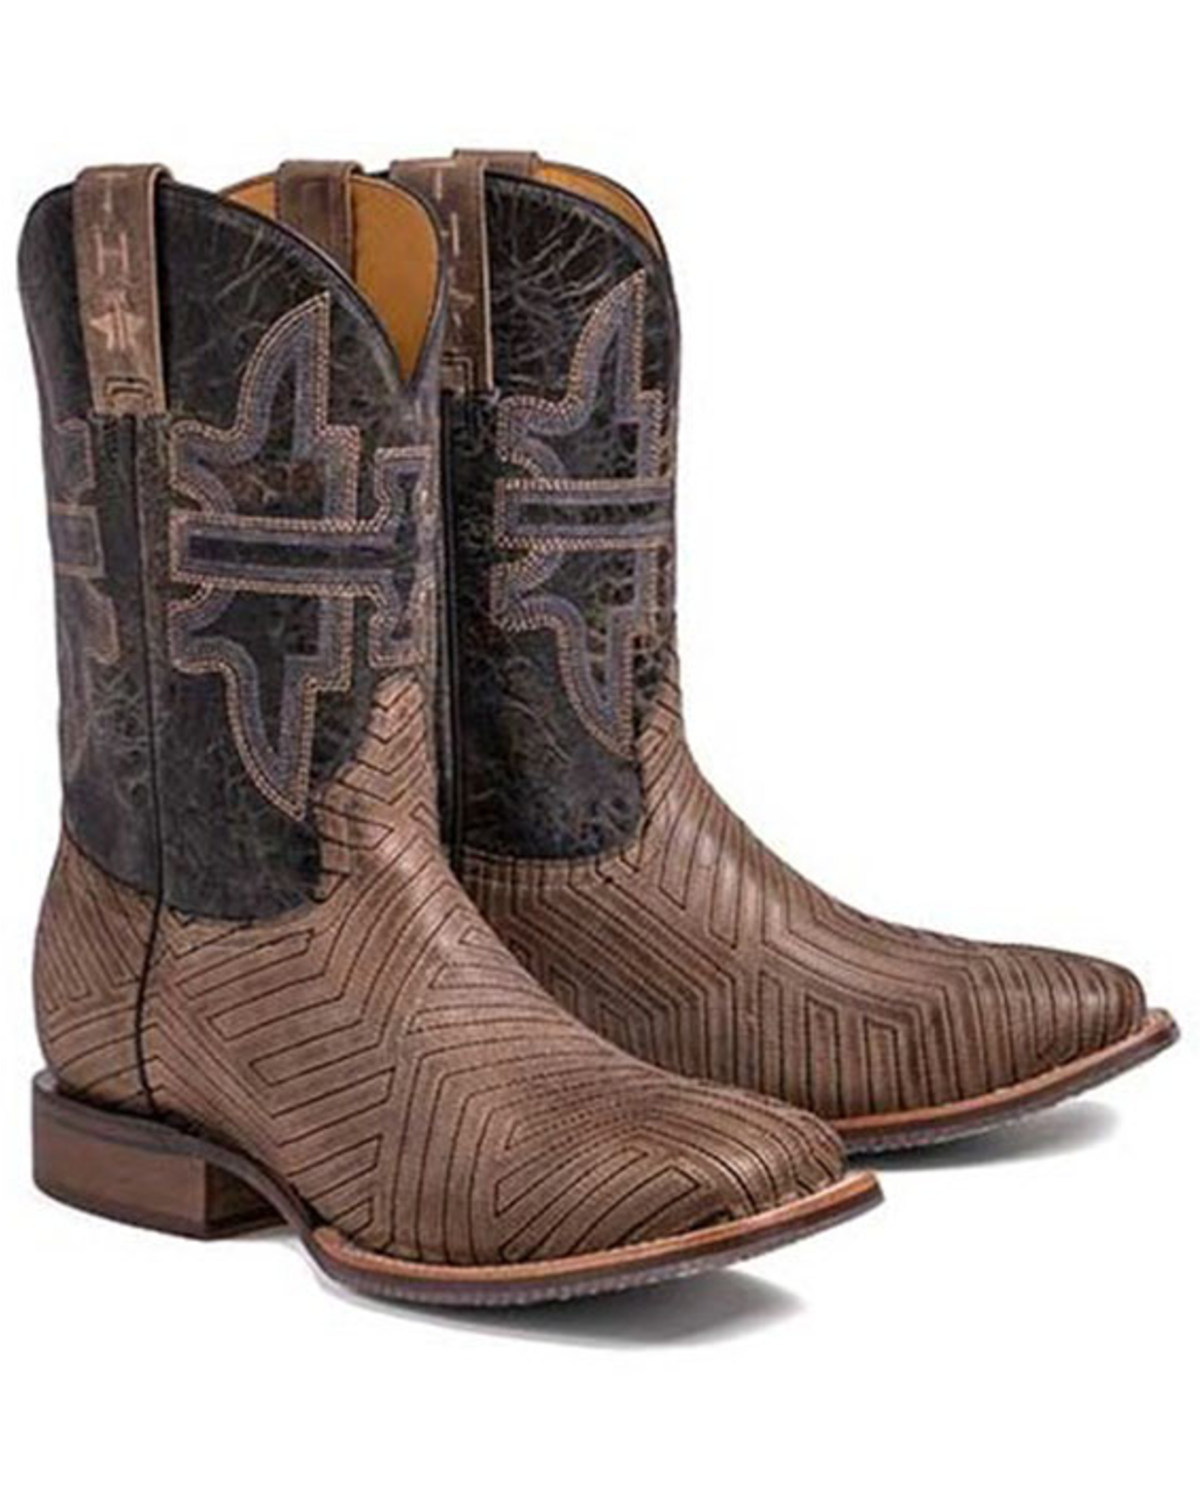 Tin Haul Men's Rowdy Western Boots - Broad Square Toe